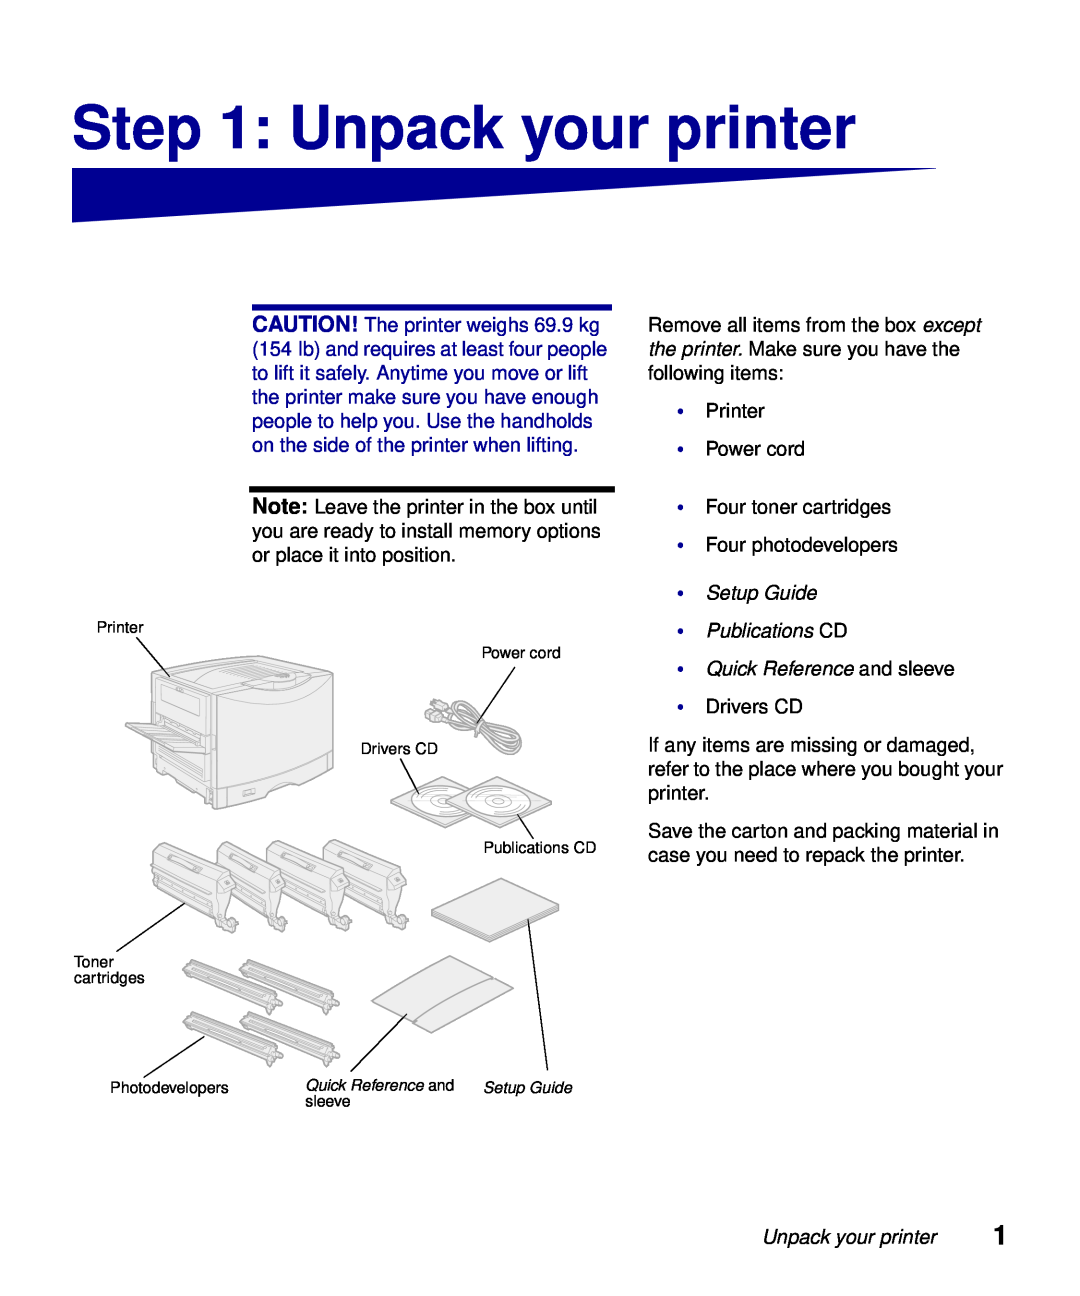 Lexmark S510-2222-00 setup guide Unpack your printer, Setup Guide Publications CD, Quick Reference and sleeve 